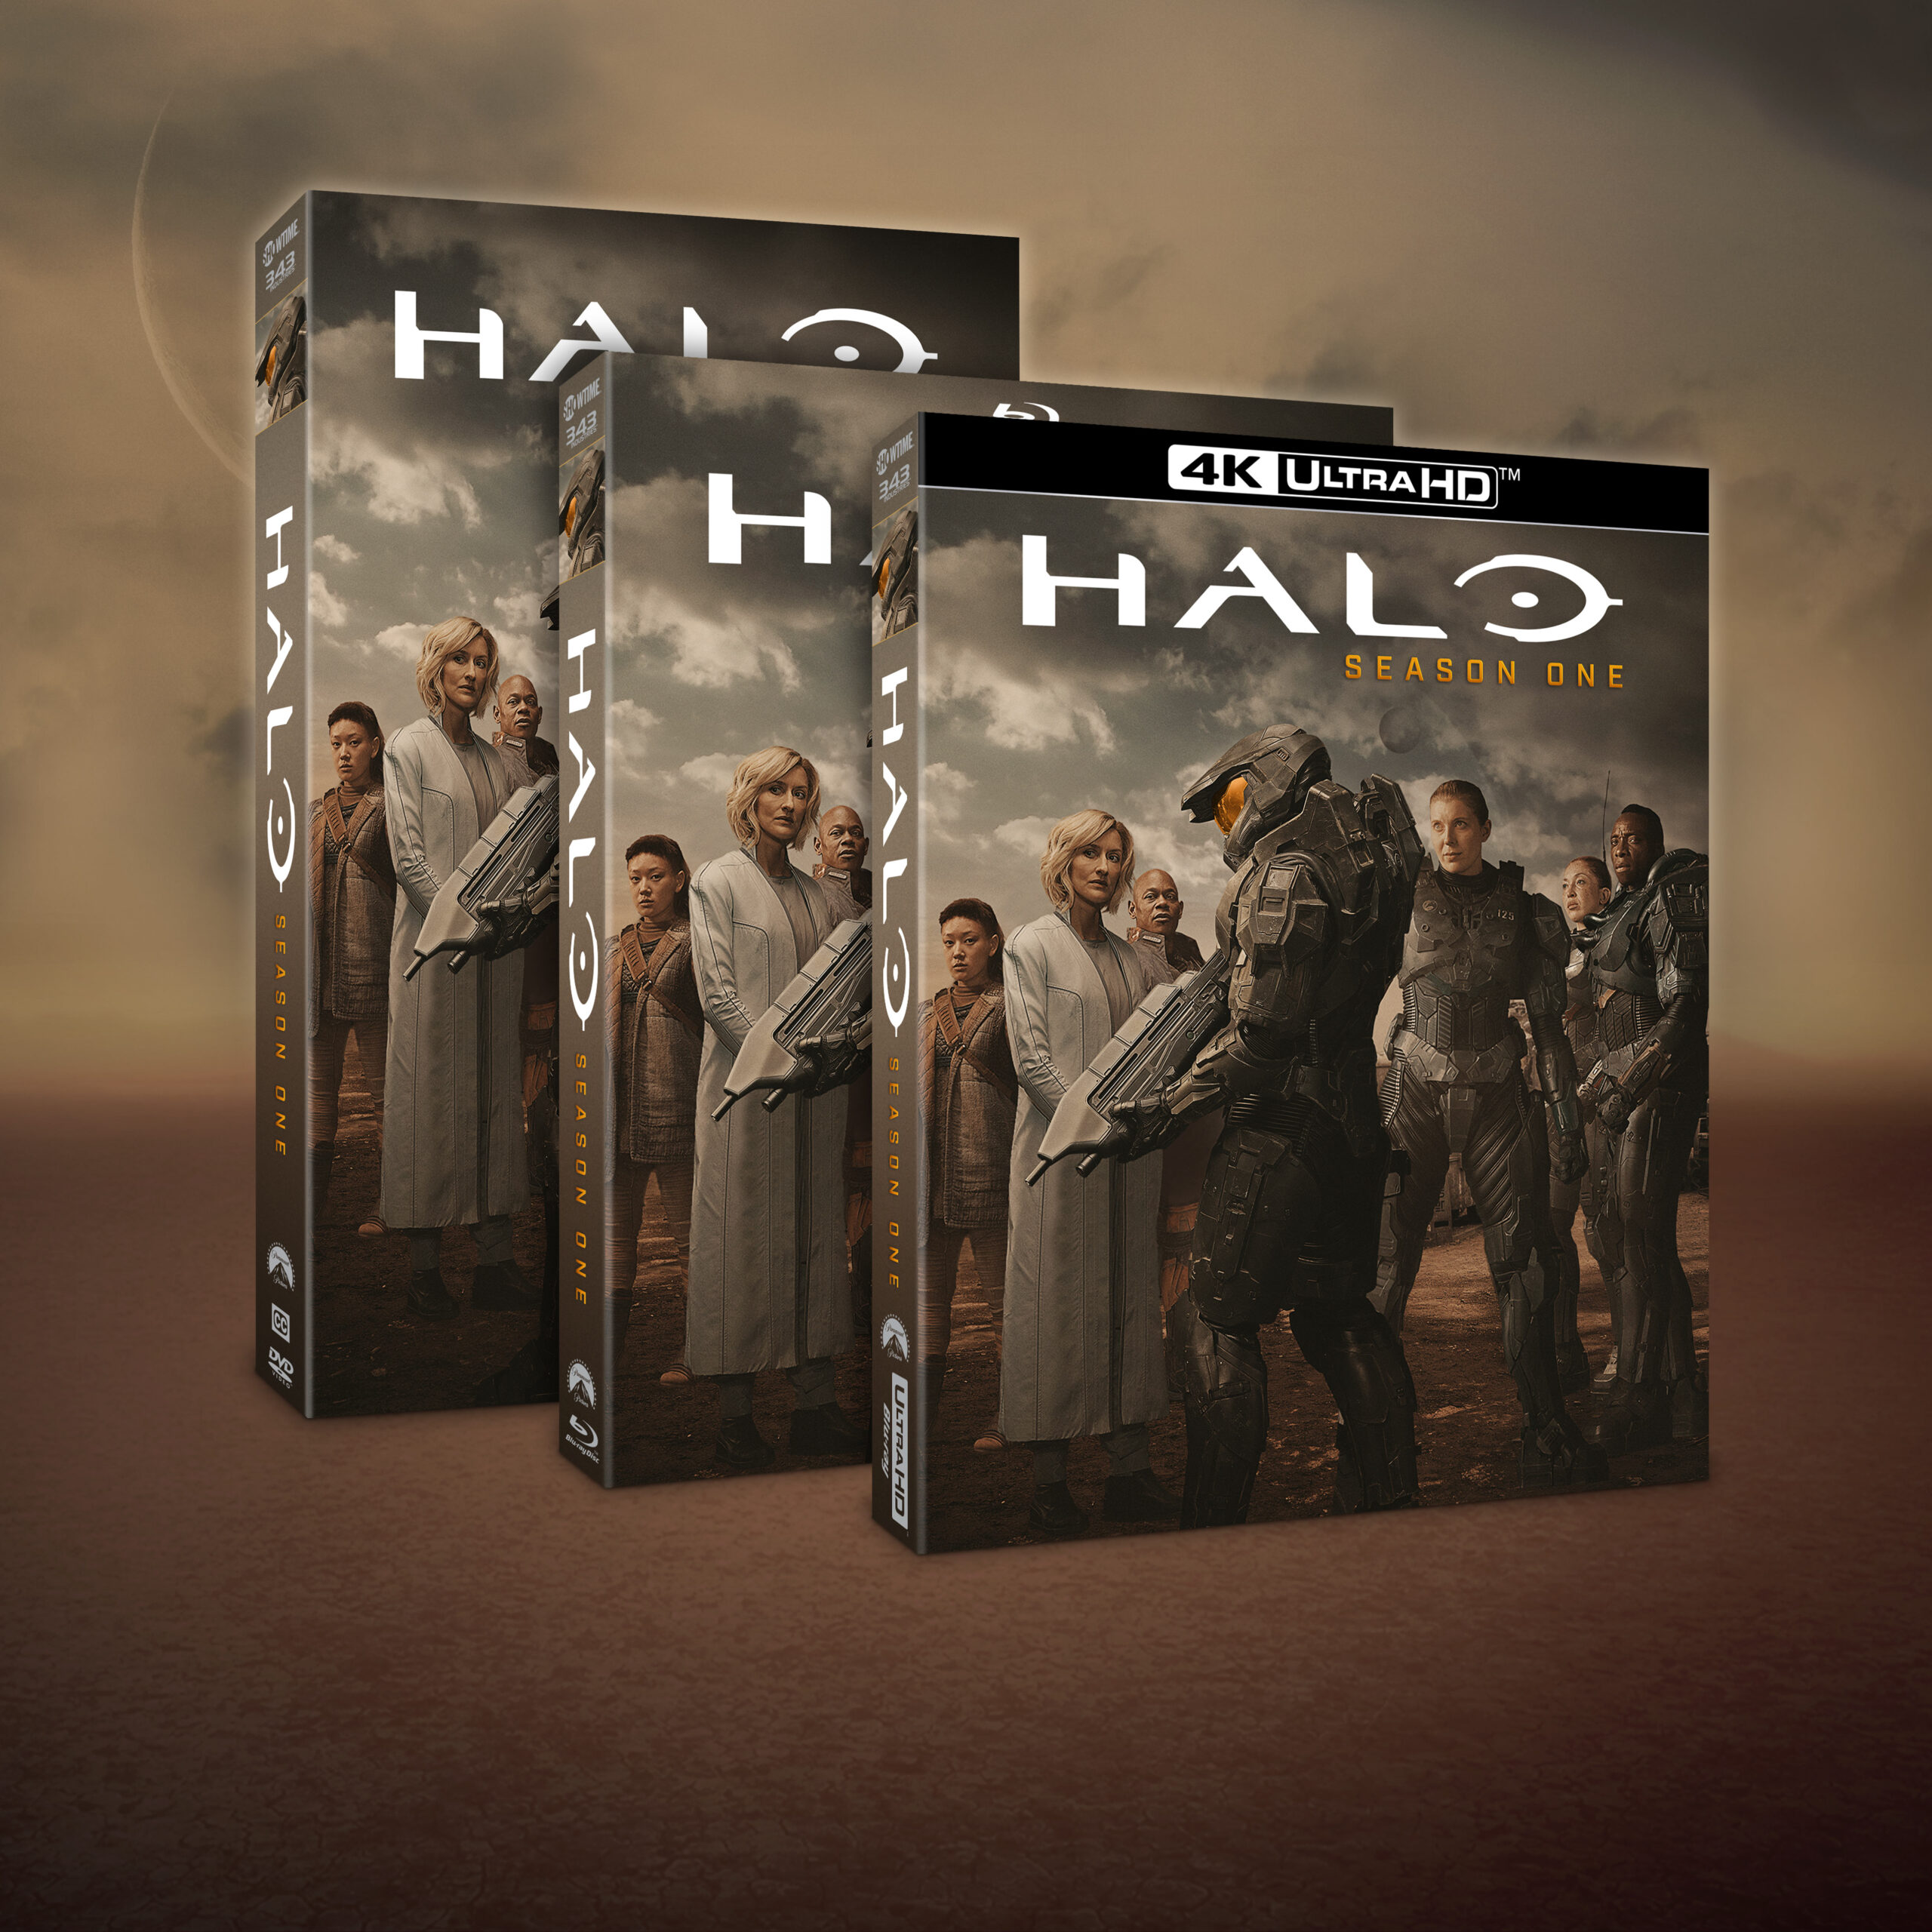 Halo The Series on DVD, Blu-ray, and 4K Ultra HD